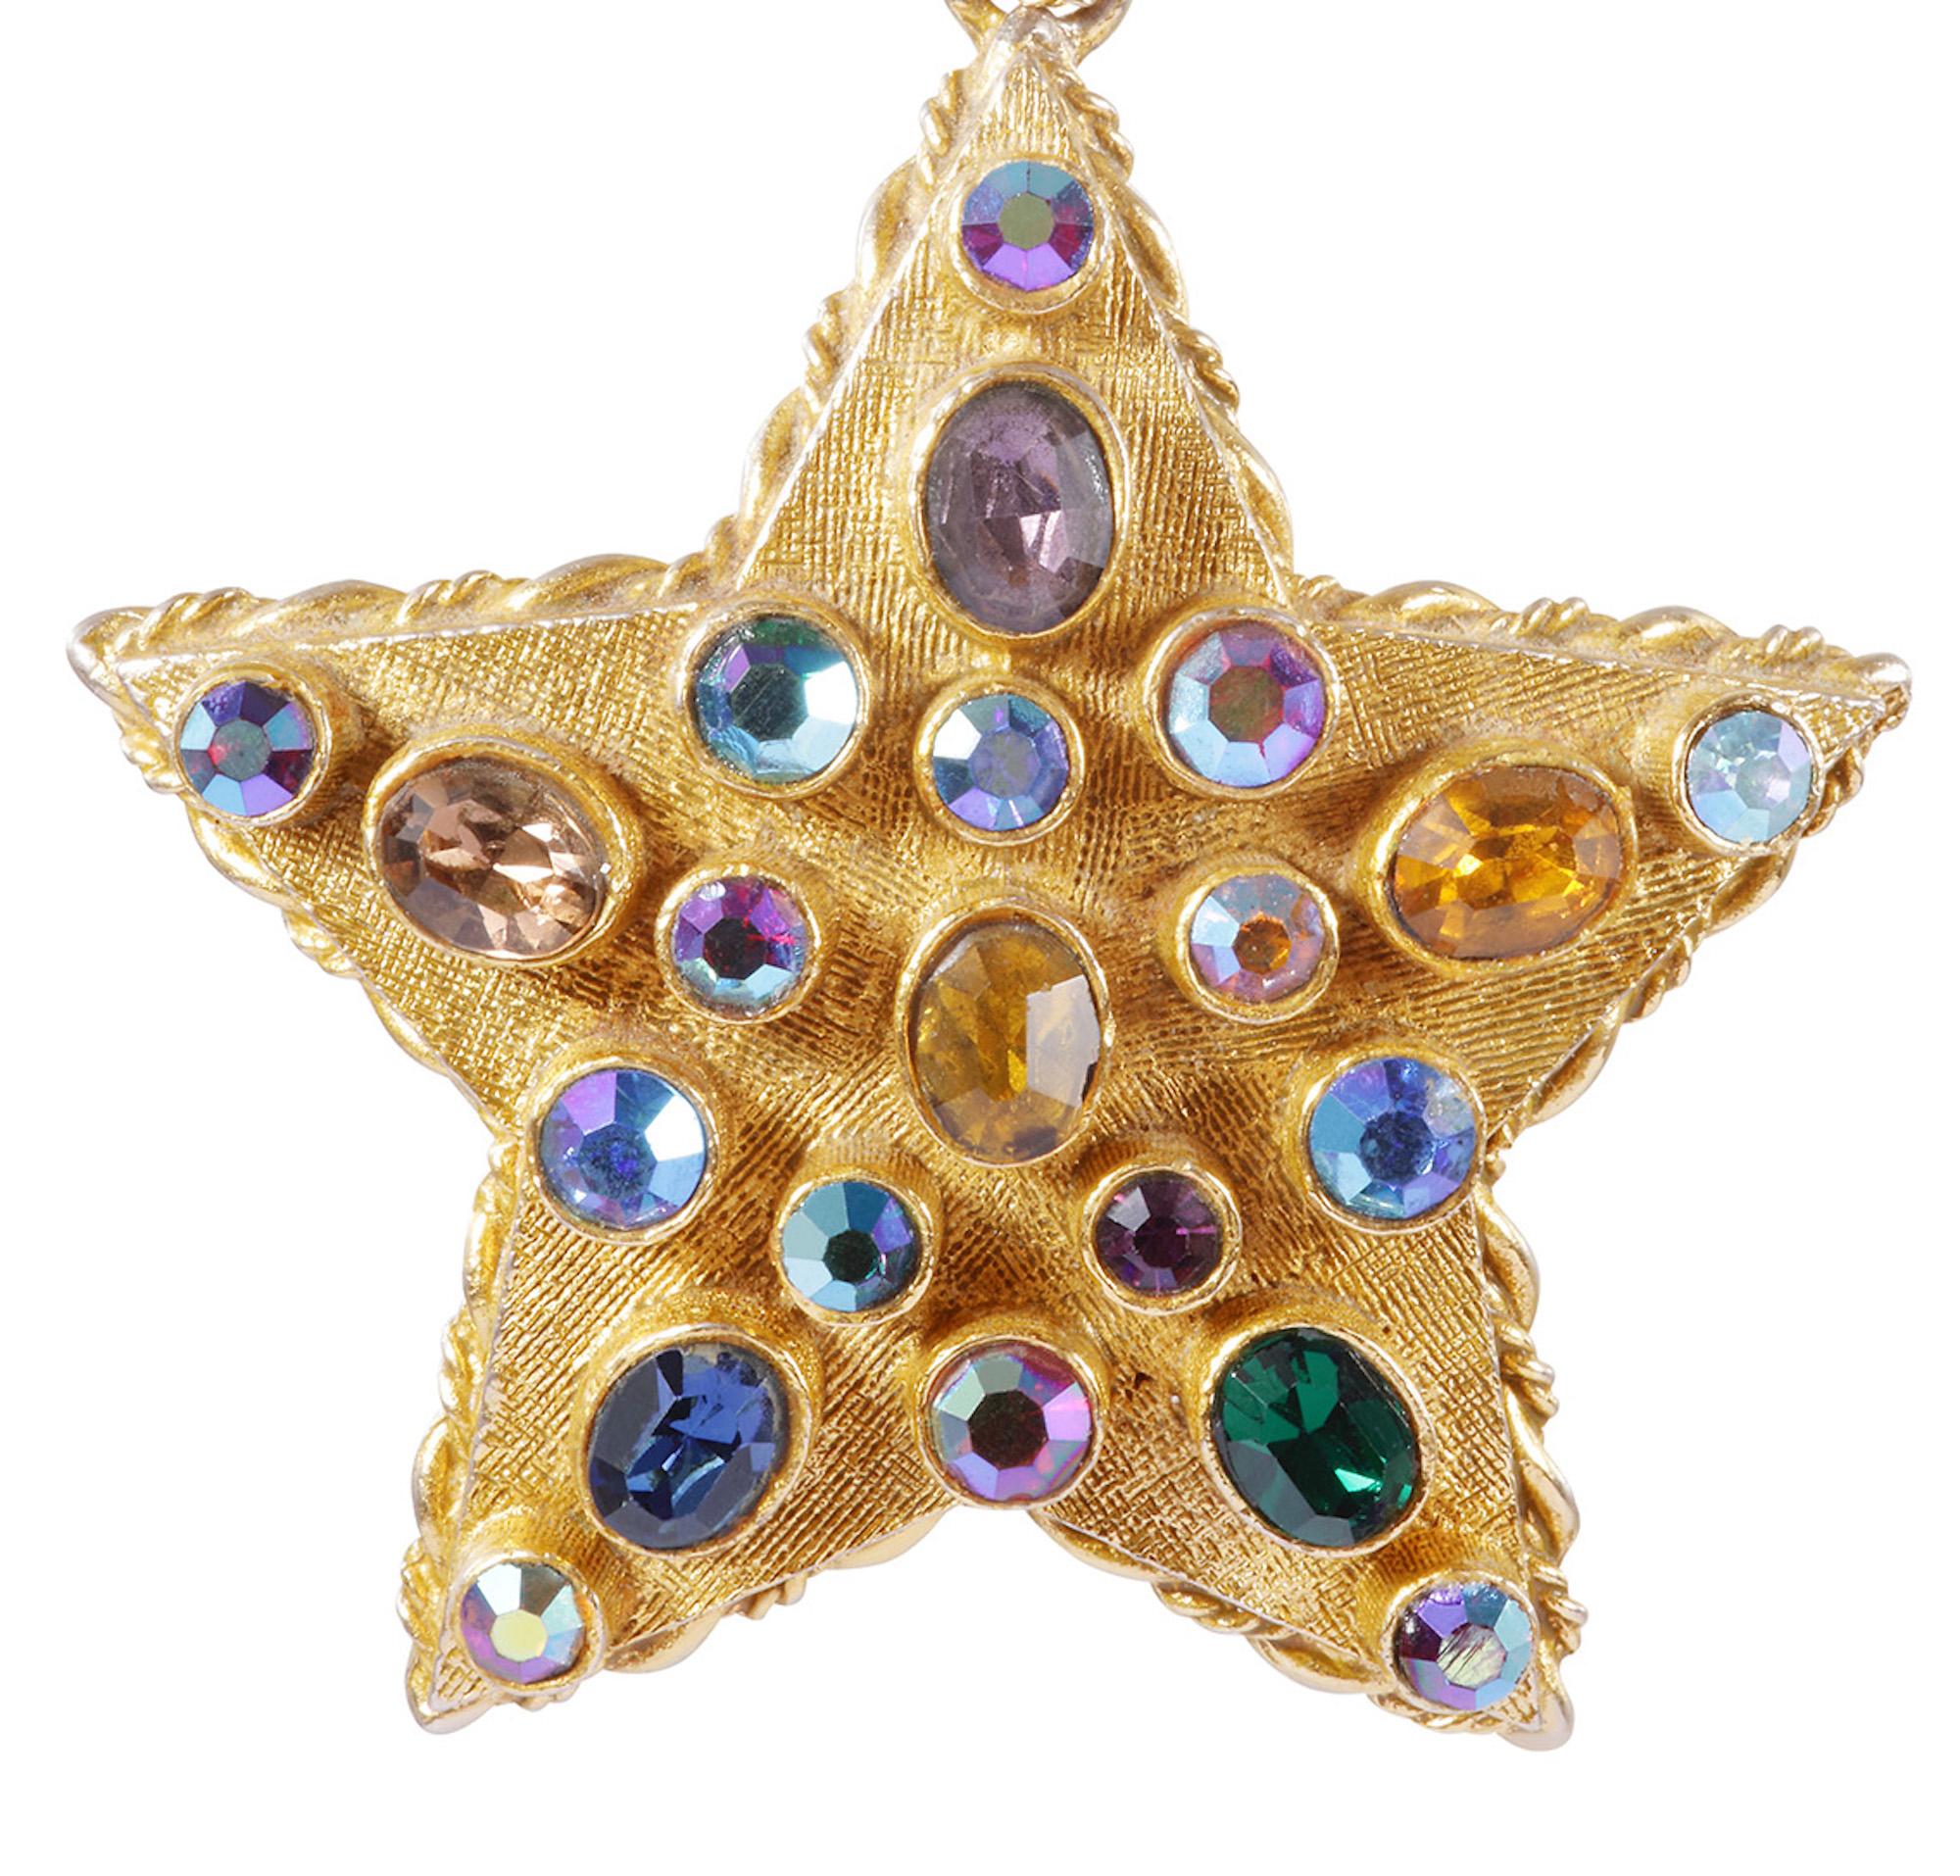 This delightful 1960s star pendant is from popular American jewellery manufacturer ART who produced high quality costume jewellery from the late 1940s through to the 70s. The pendant measures 2.5 inches in diameter and glitters with bezel set round